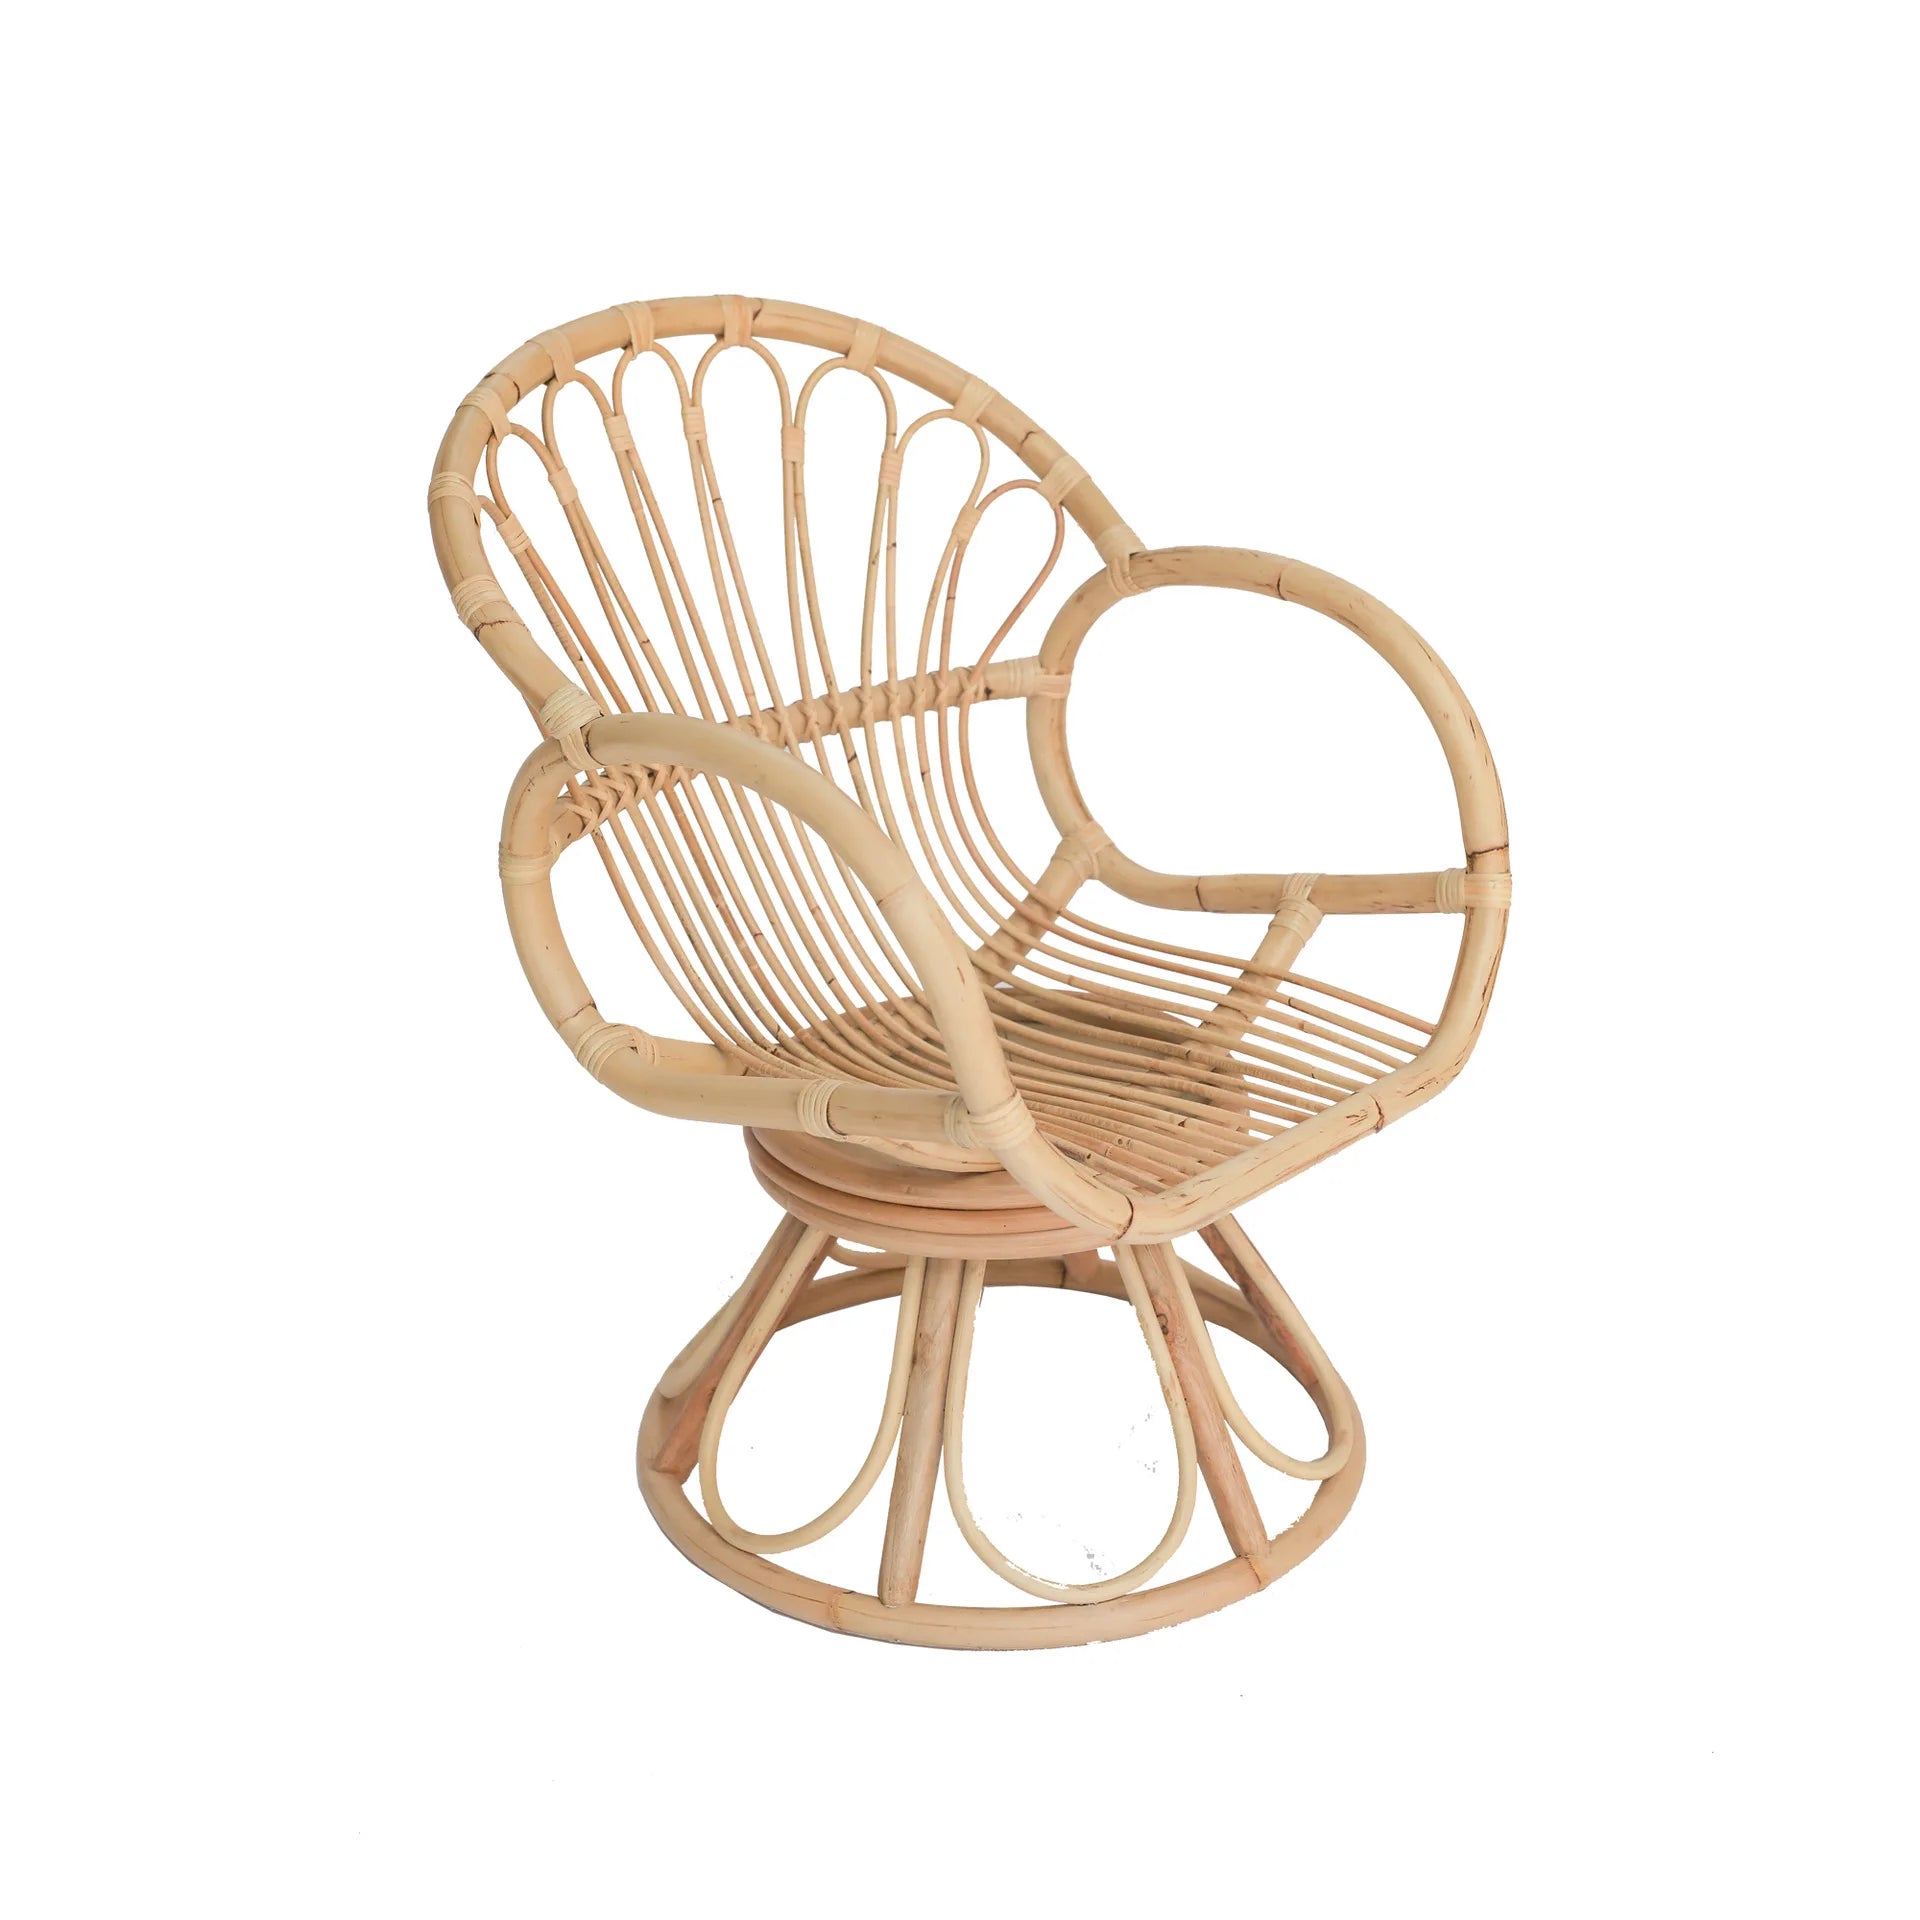 Recliner Chair Peacock Swivel Chair Rattan Woven Single Balcony Leisure Rattan Chair Nordic Household Swivel Chair Free Shipping Golden Atelier